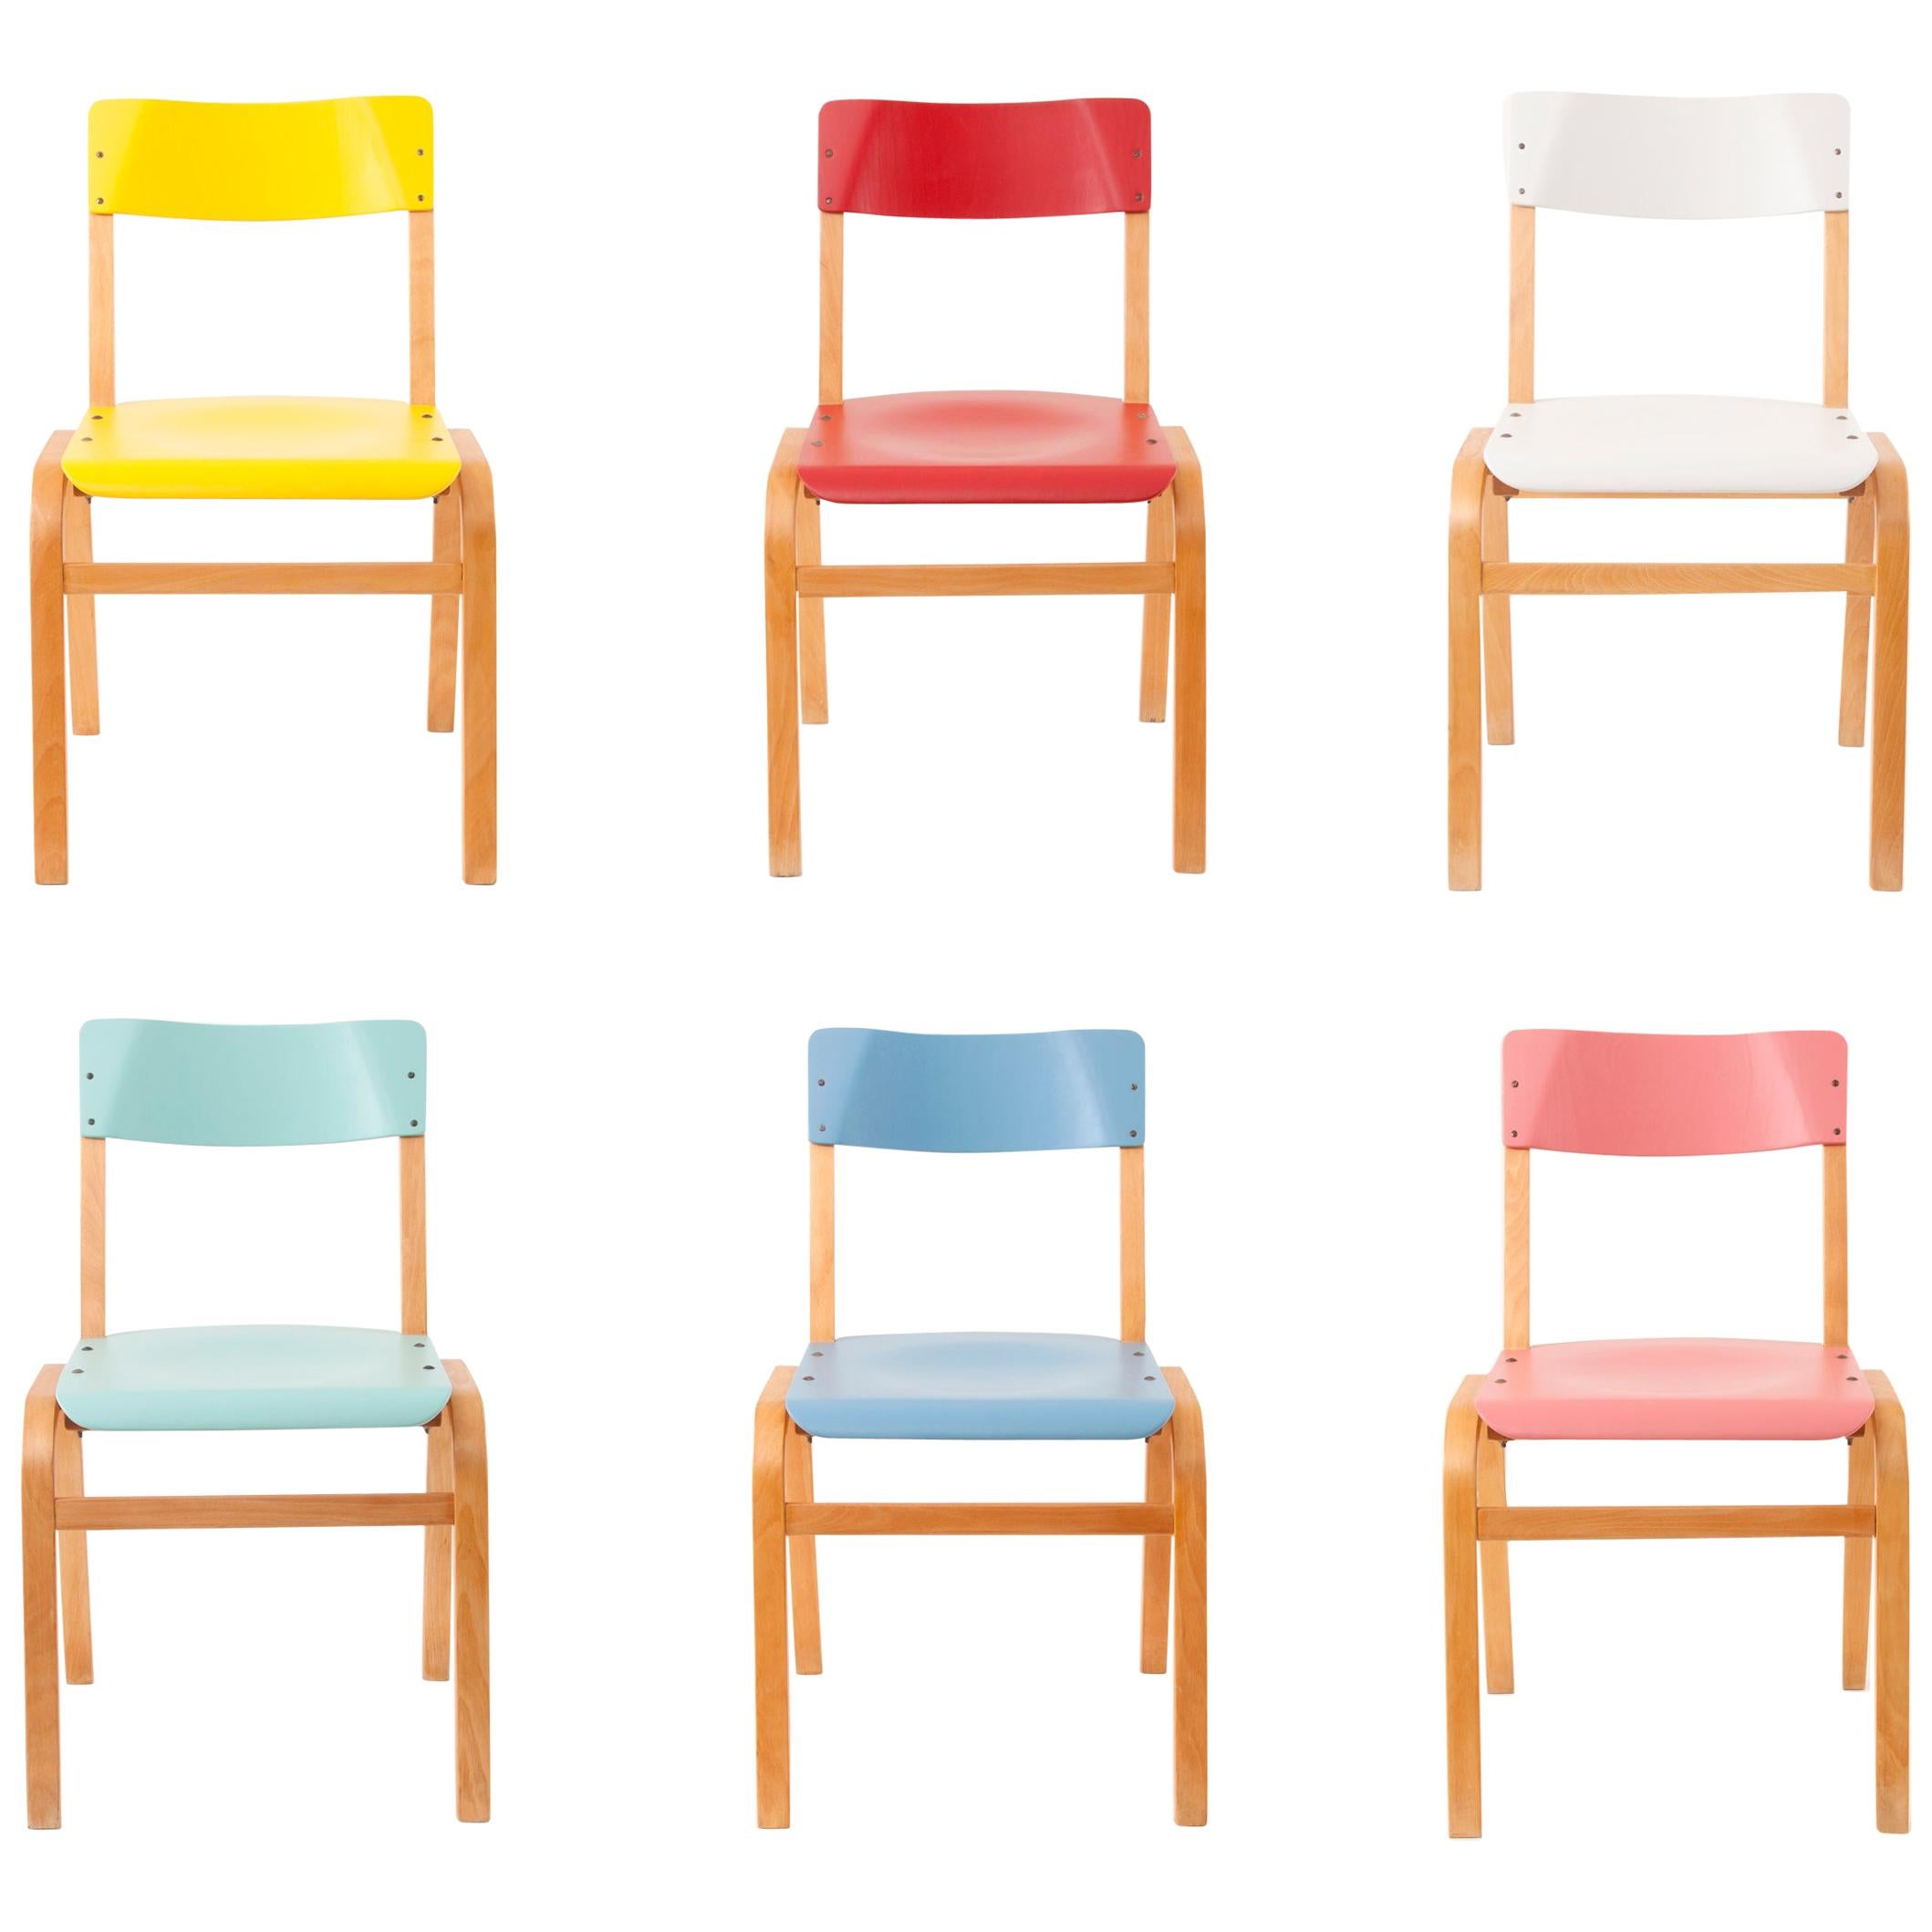 Up to 24 Colorful Midcentury Bentwood Chairs by Ton, Czechoslovakia, 1960s